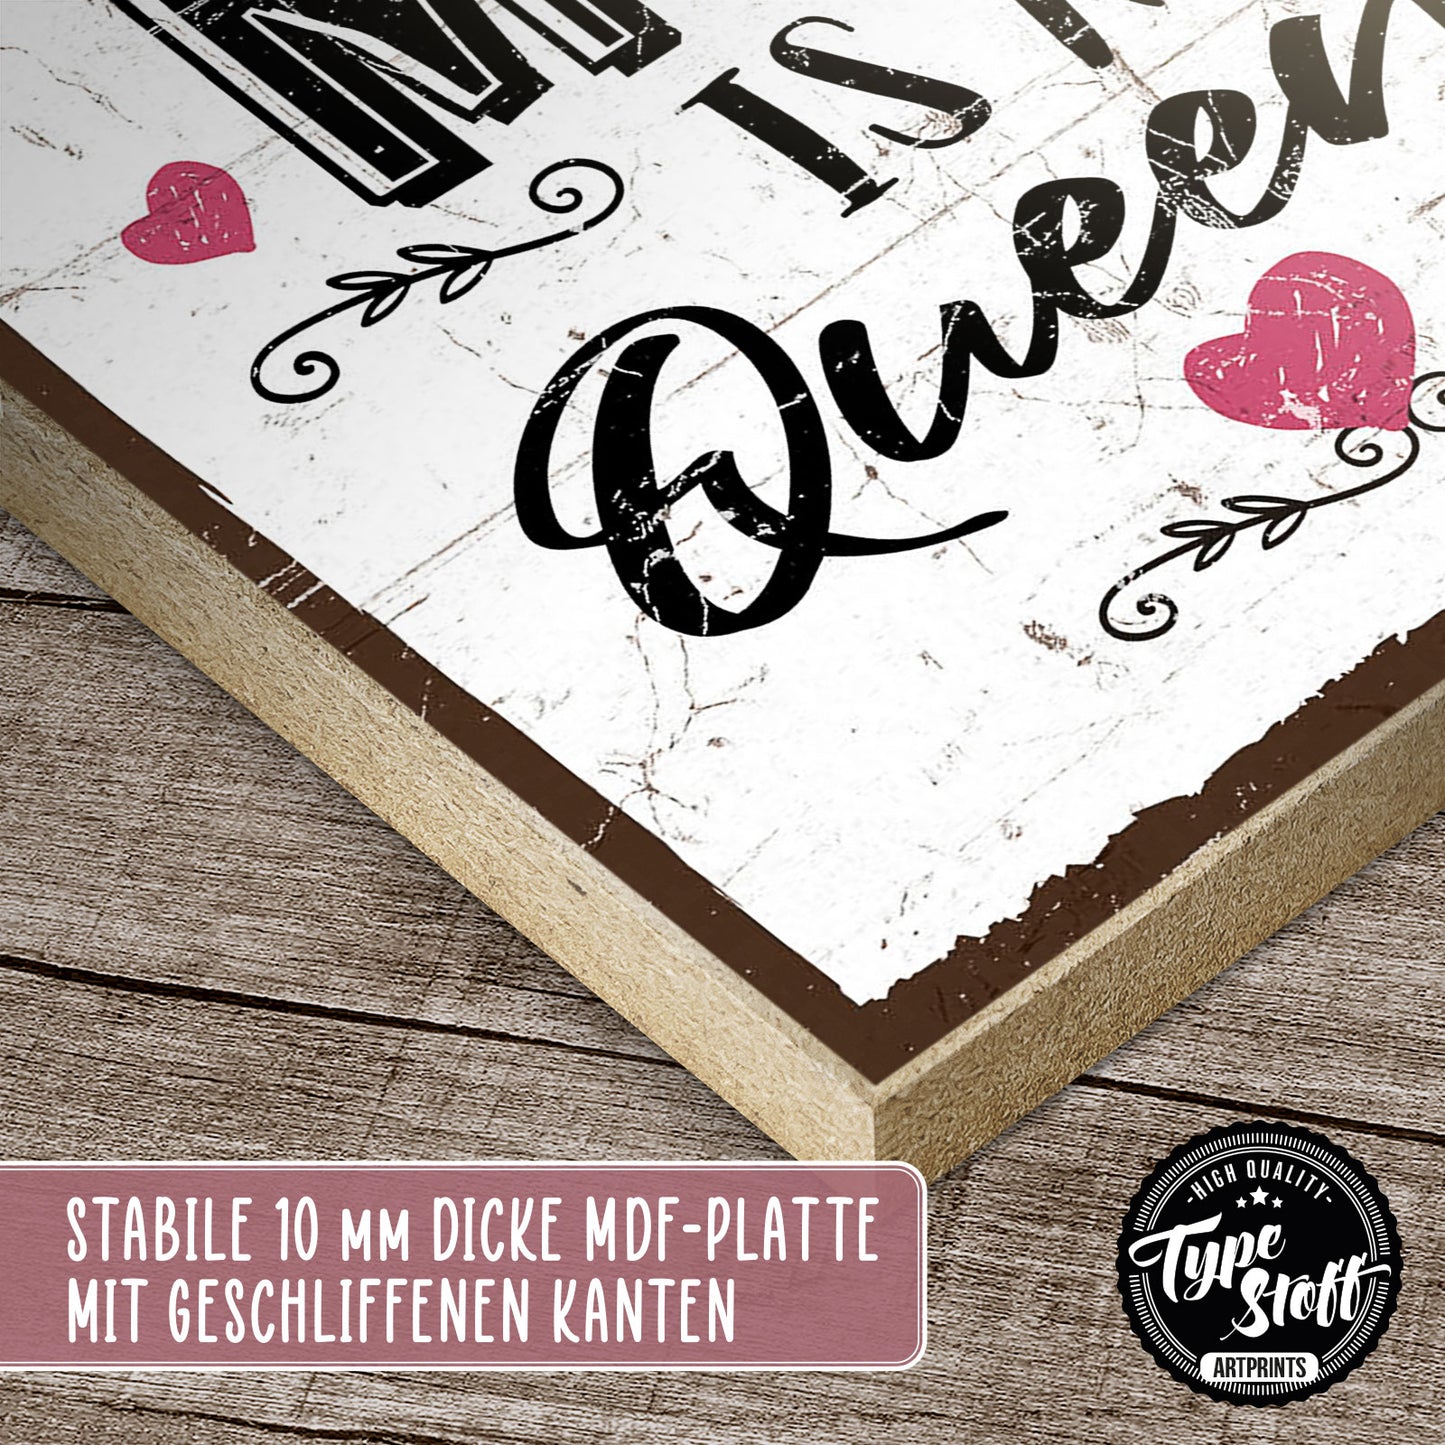 Holzschild mit Spruch - Mama - every mom is a queen - HS-GH-01161